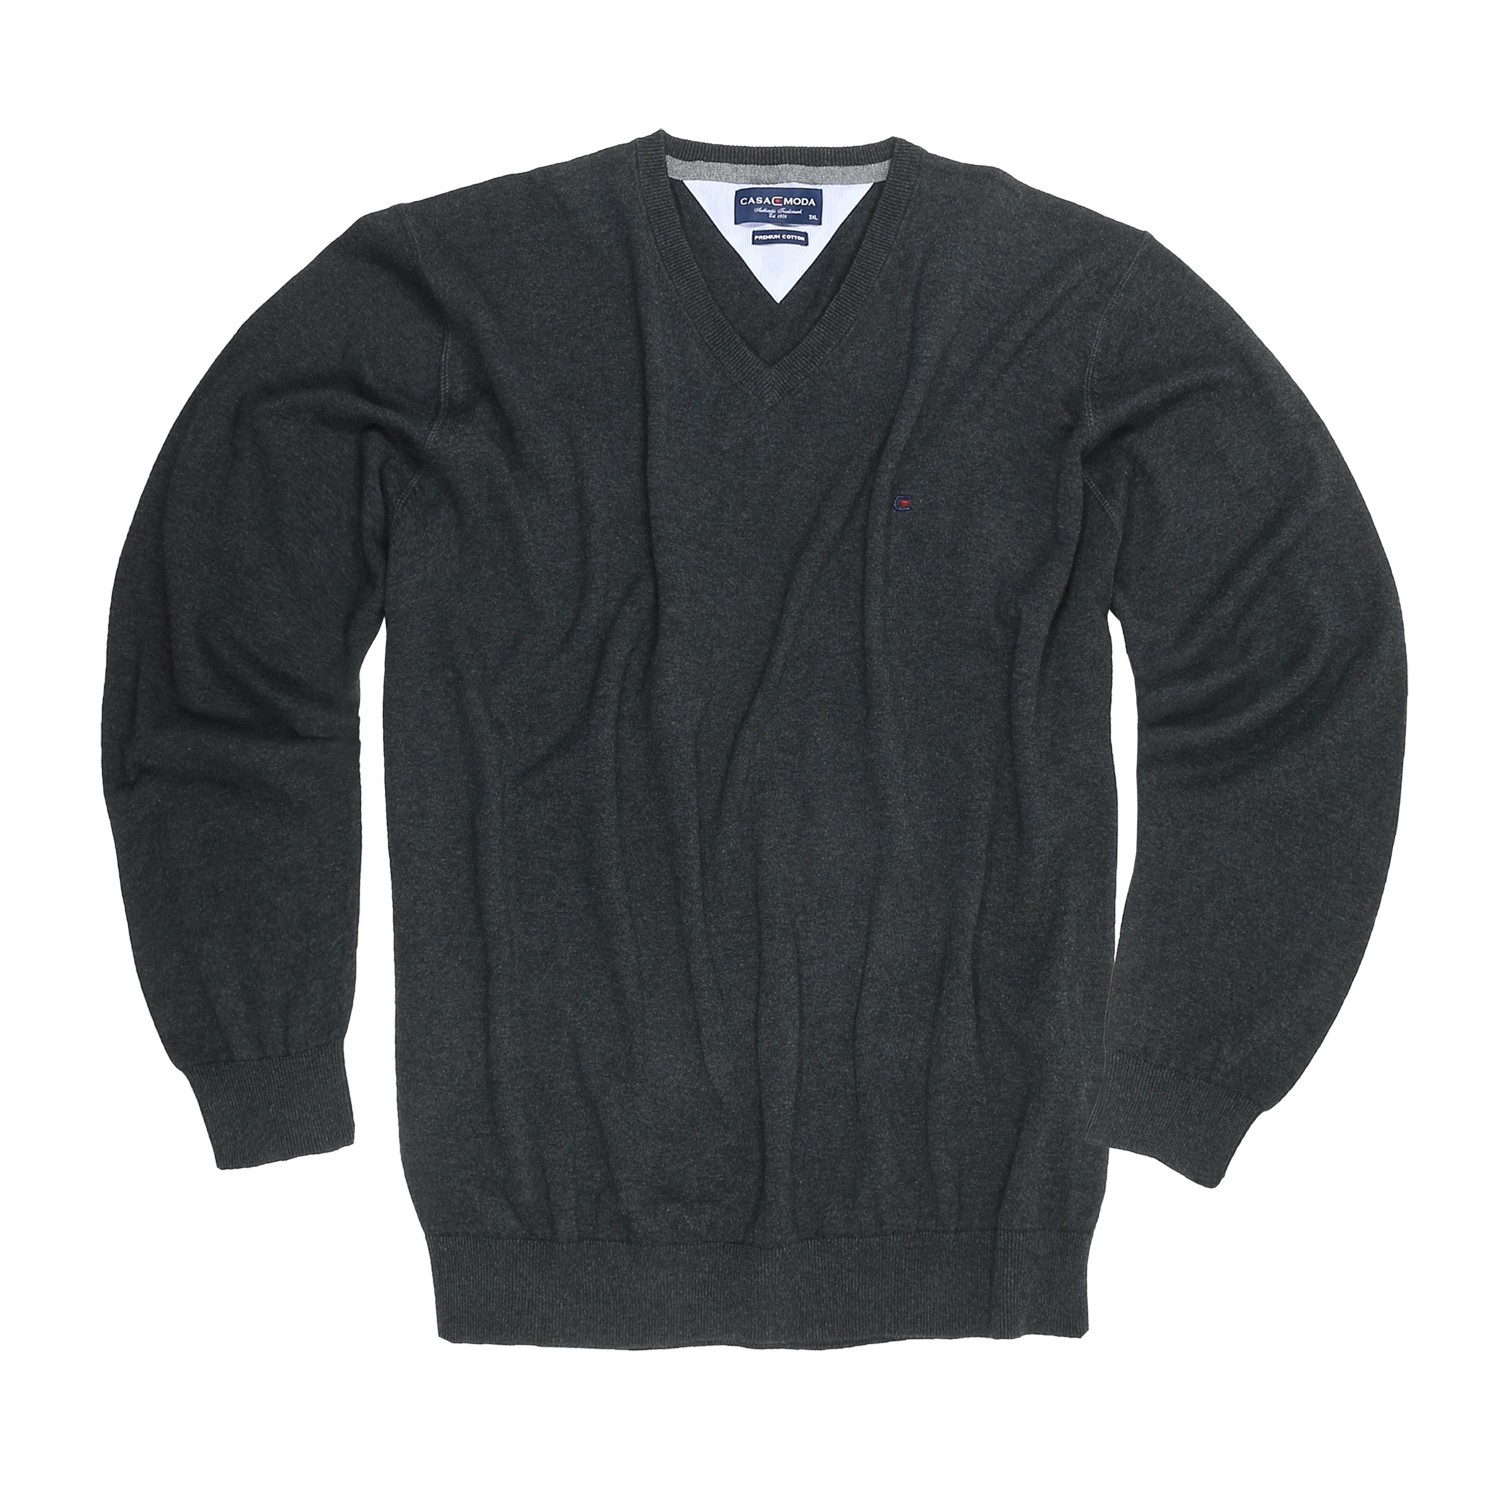 Knitted sweater for men in dark grey by Casamoda in plus sizes up to 6XL